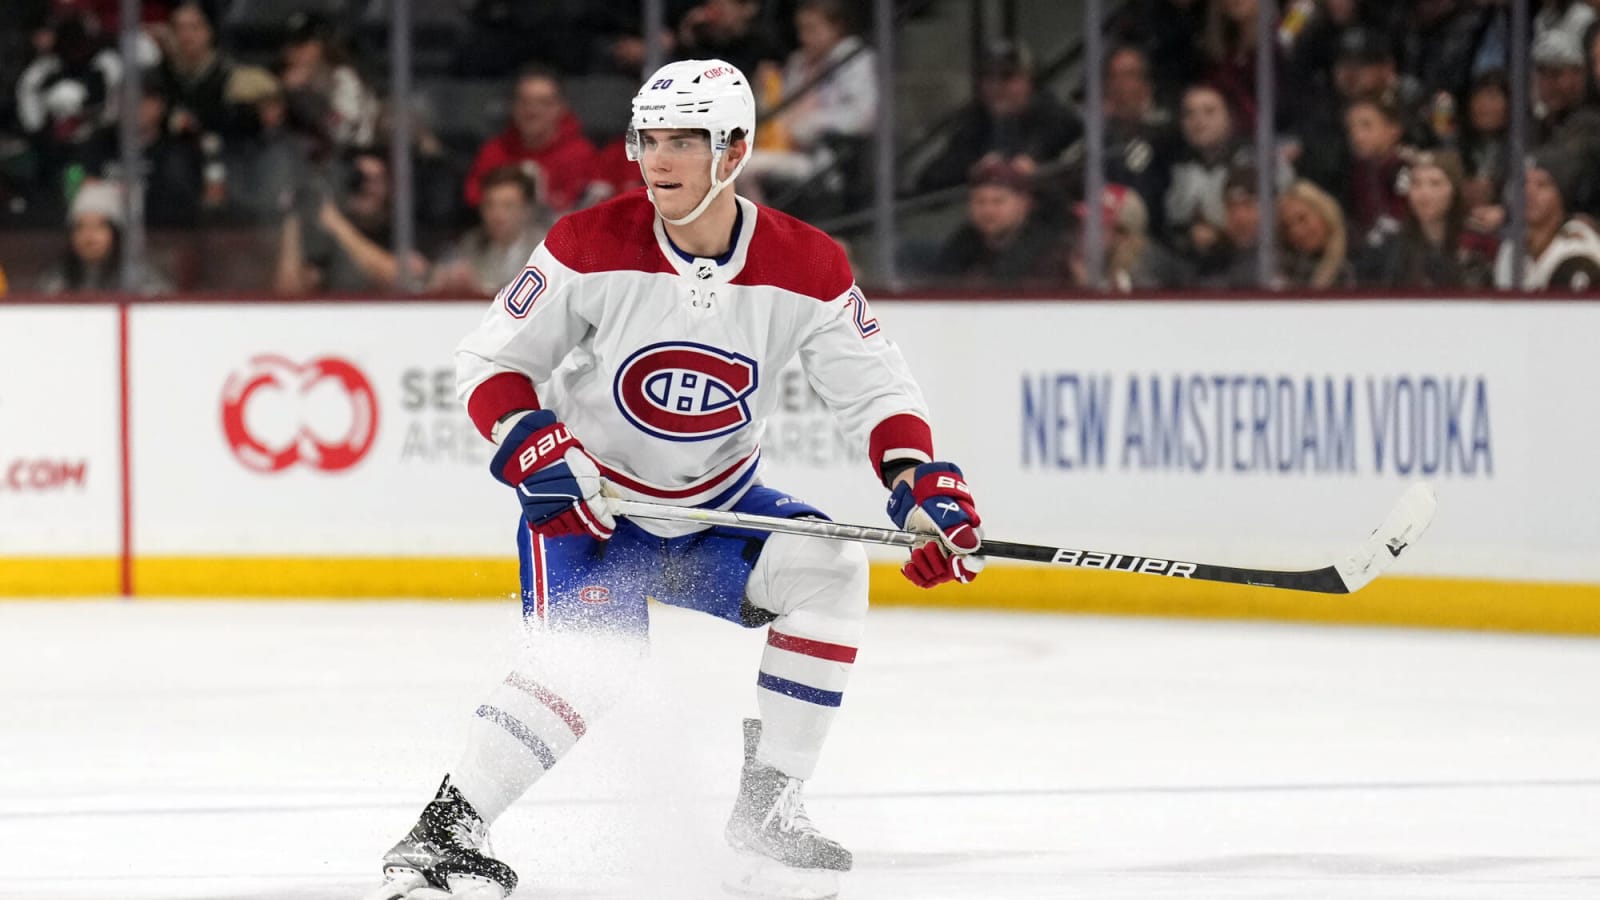 Slafkovsky Making Changes After Tough First Year With Canadiens